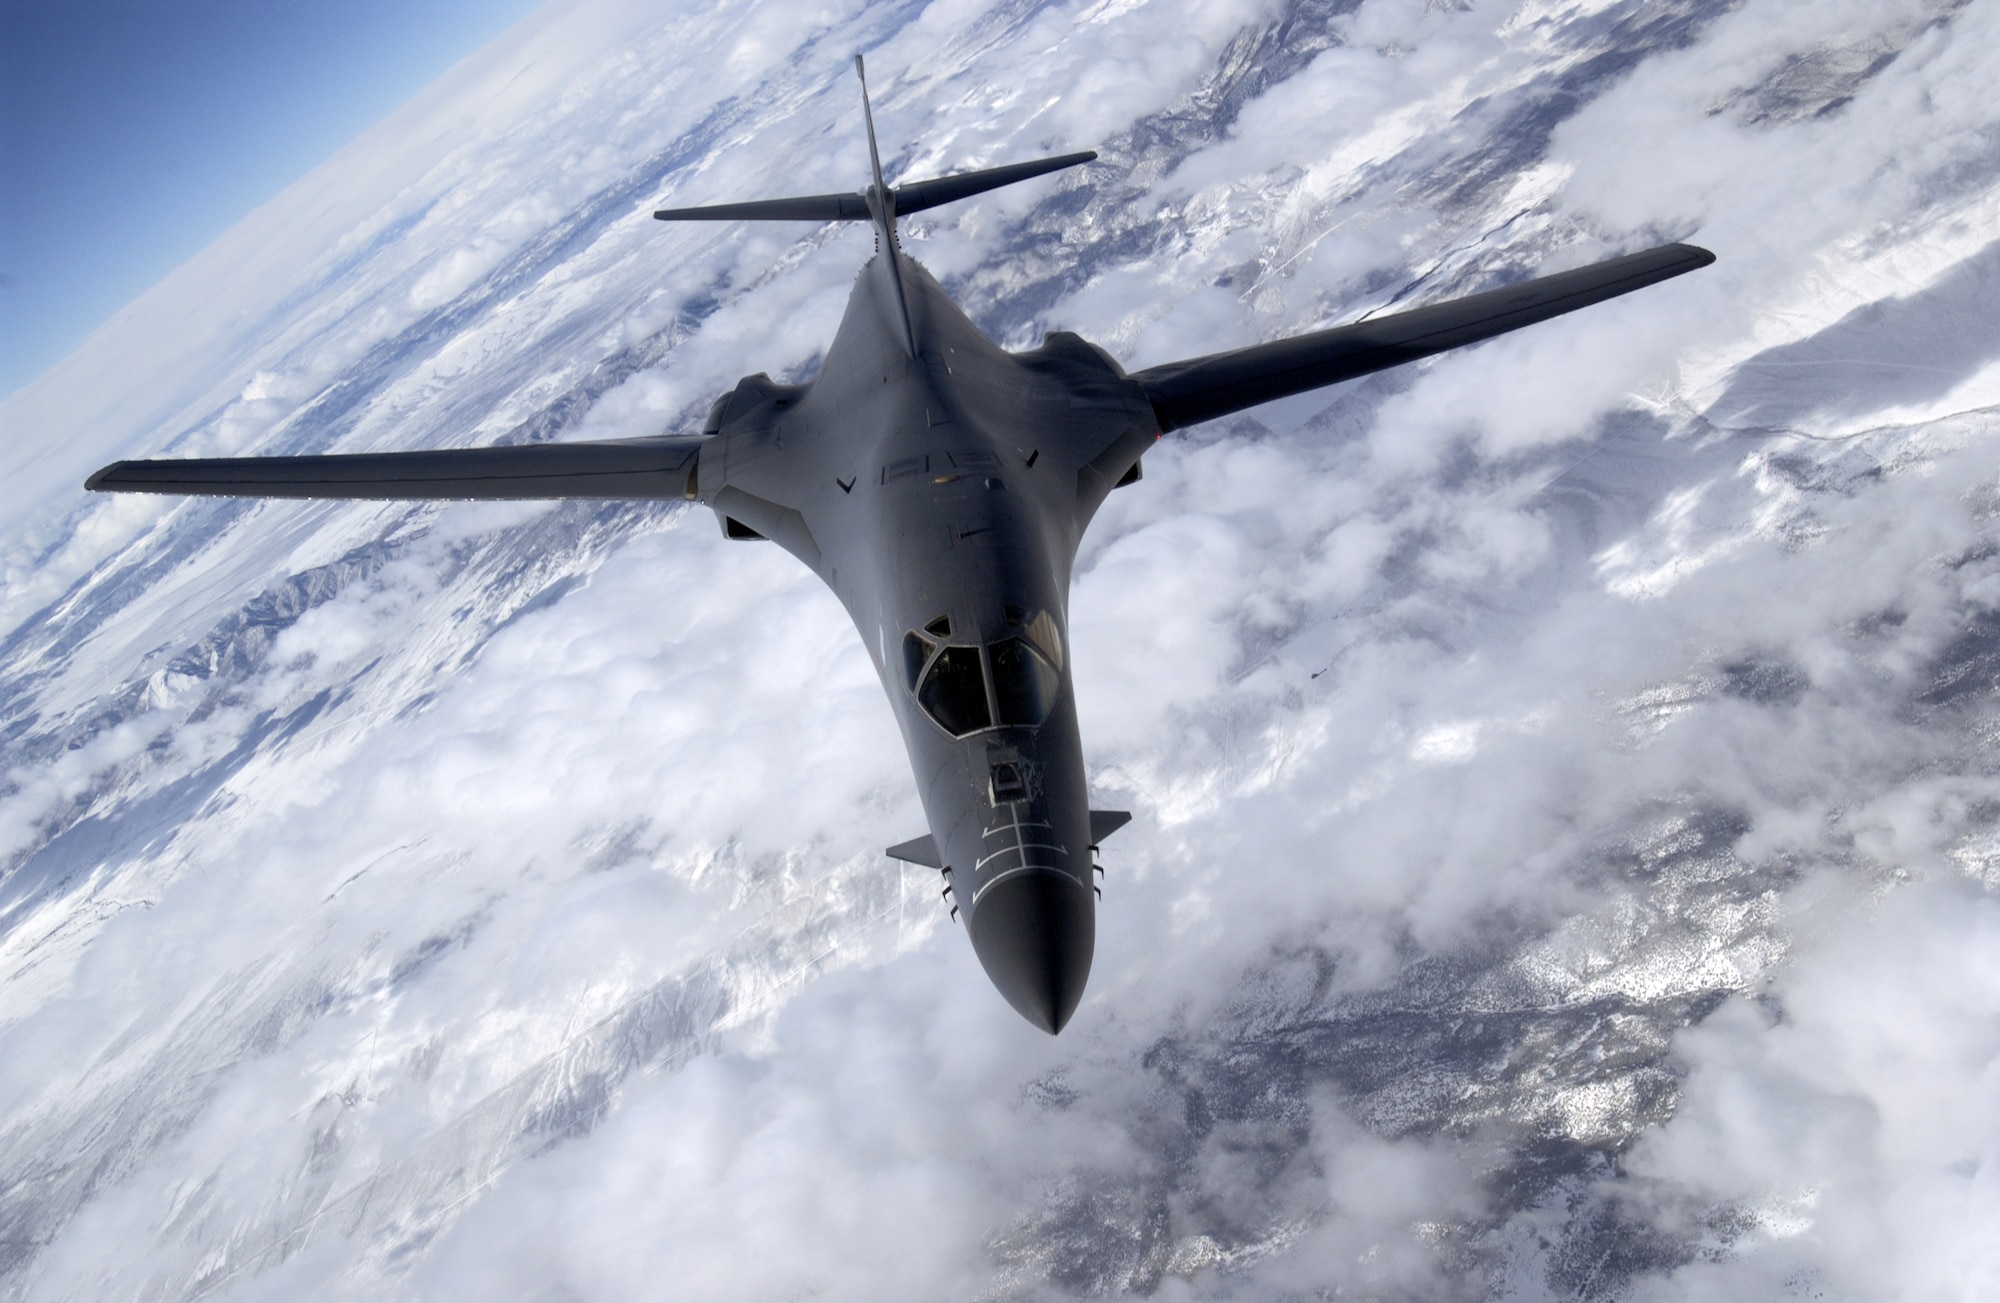 AIRBORNE -- The B-1B Lancer cruises above the clouds. A B-1B test program that combined testing of software upgrades, along with integrating the 500-pound Joint Direct Attack Munition wrapped up here Feb. 24. (U.S. Air Force photo by Master Sgt. Lance Cheung)